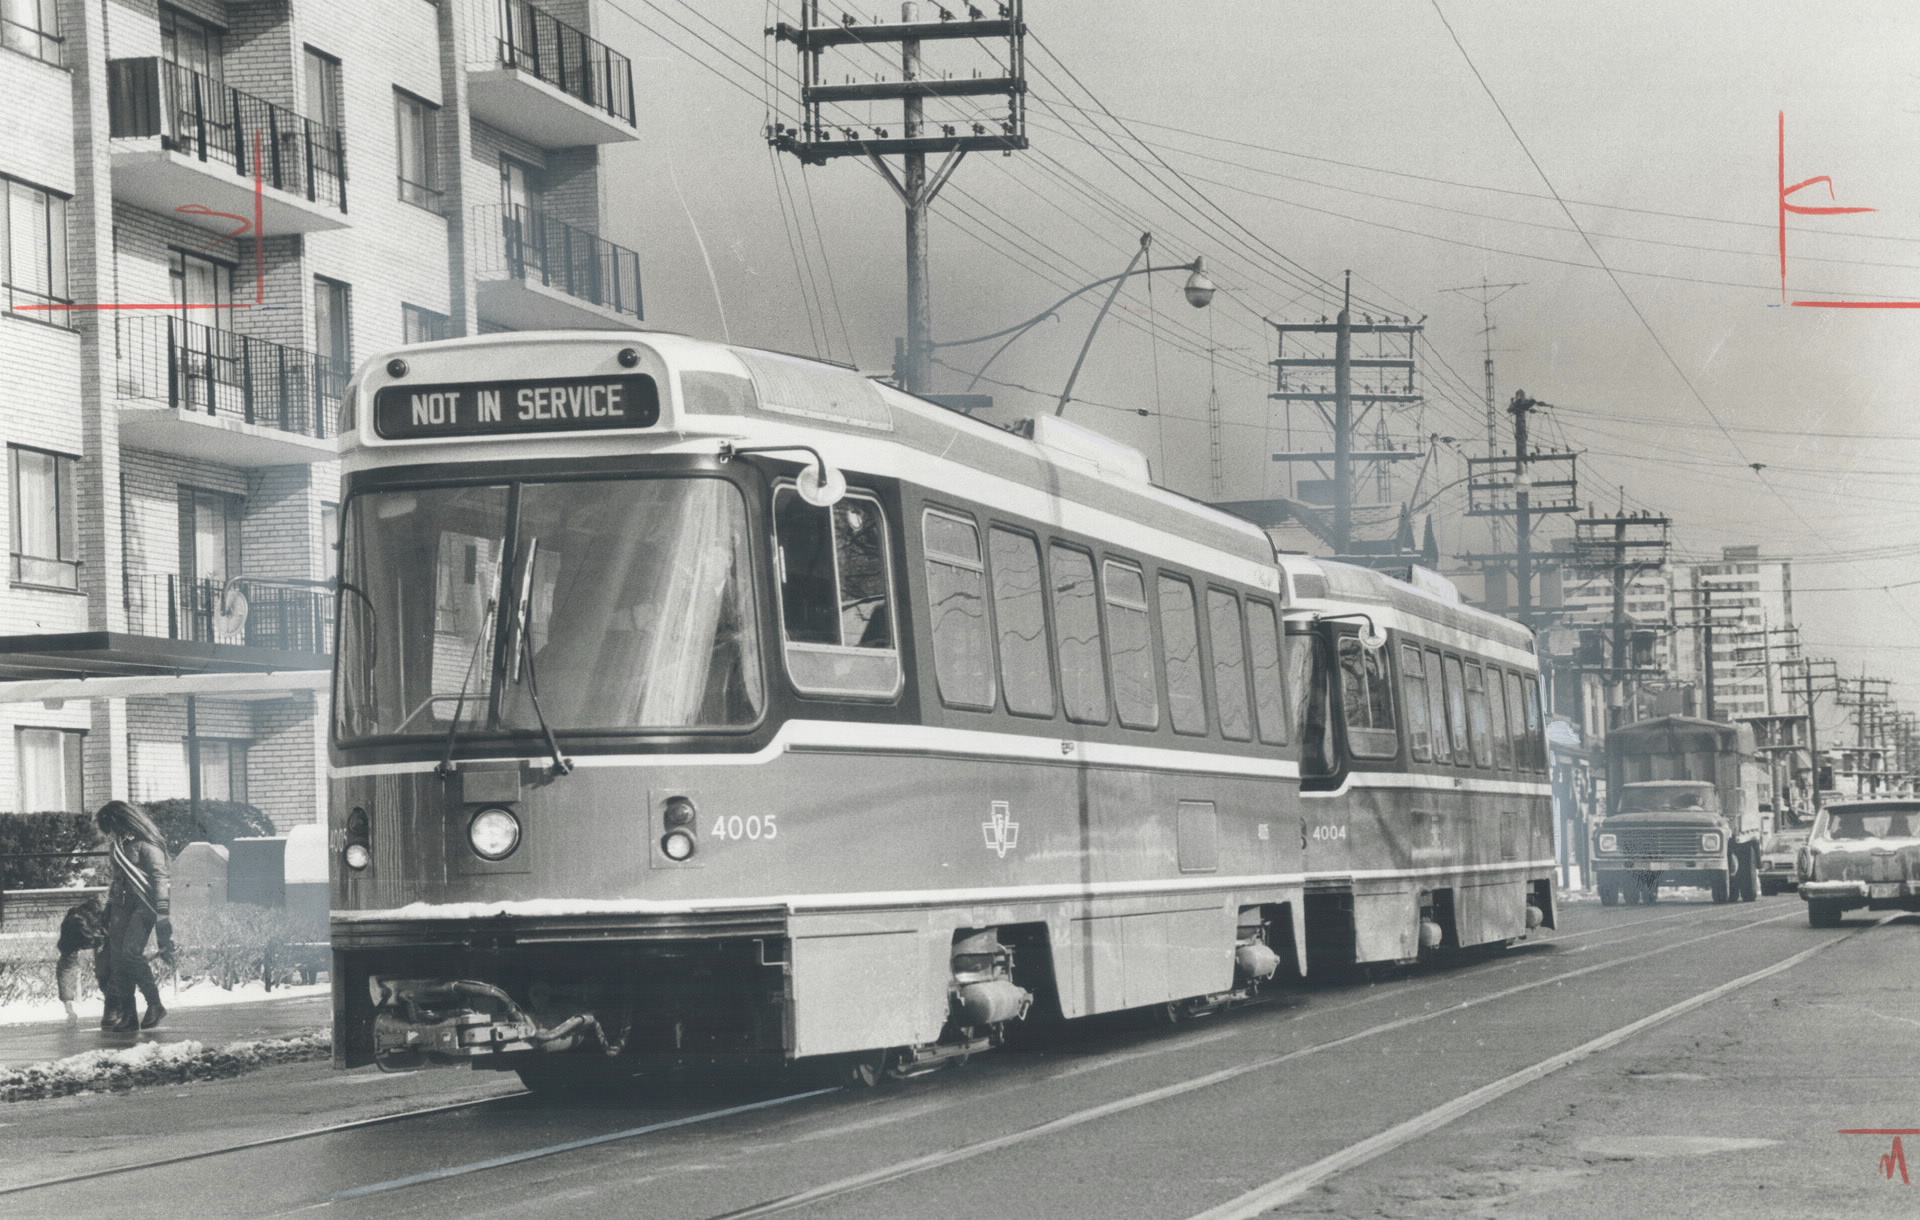 This image shows two CLRV LRV streetcars coupled together.